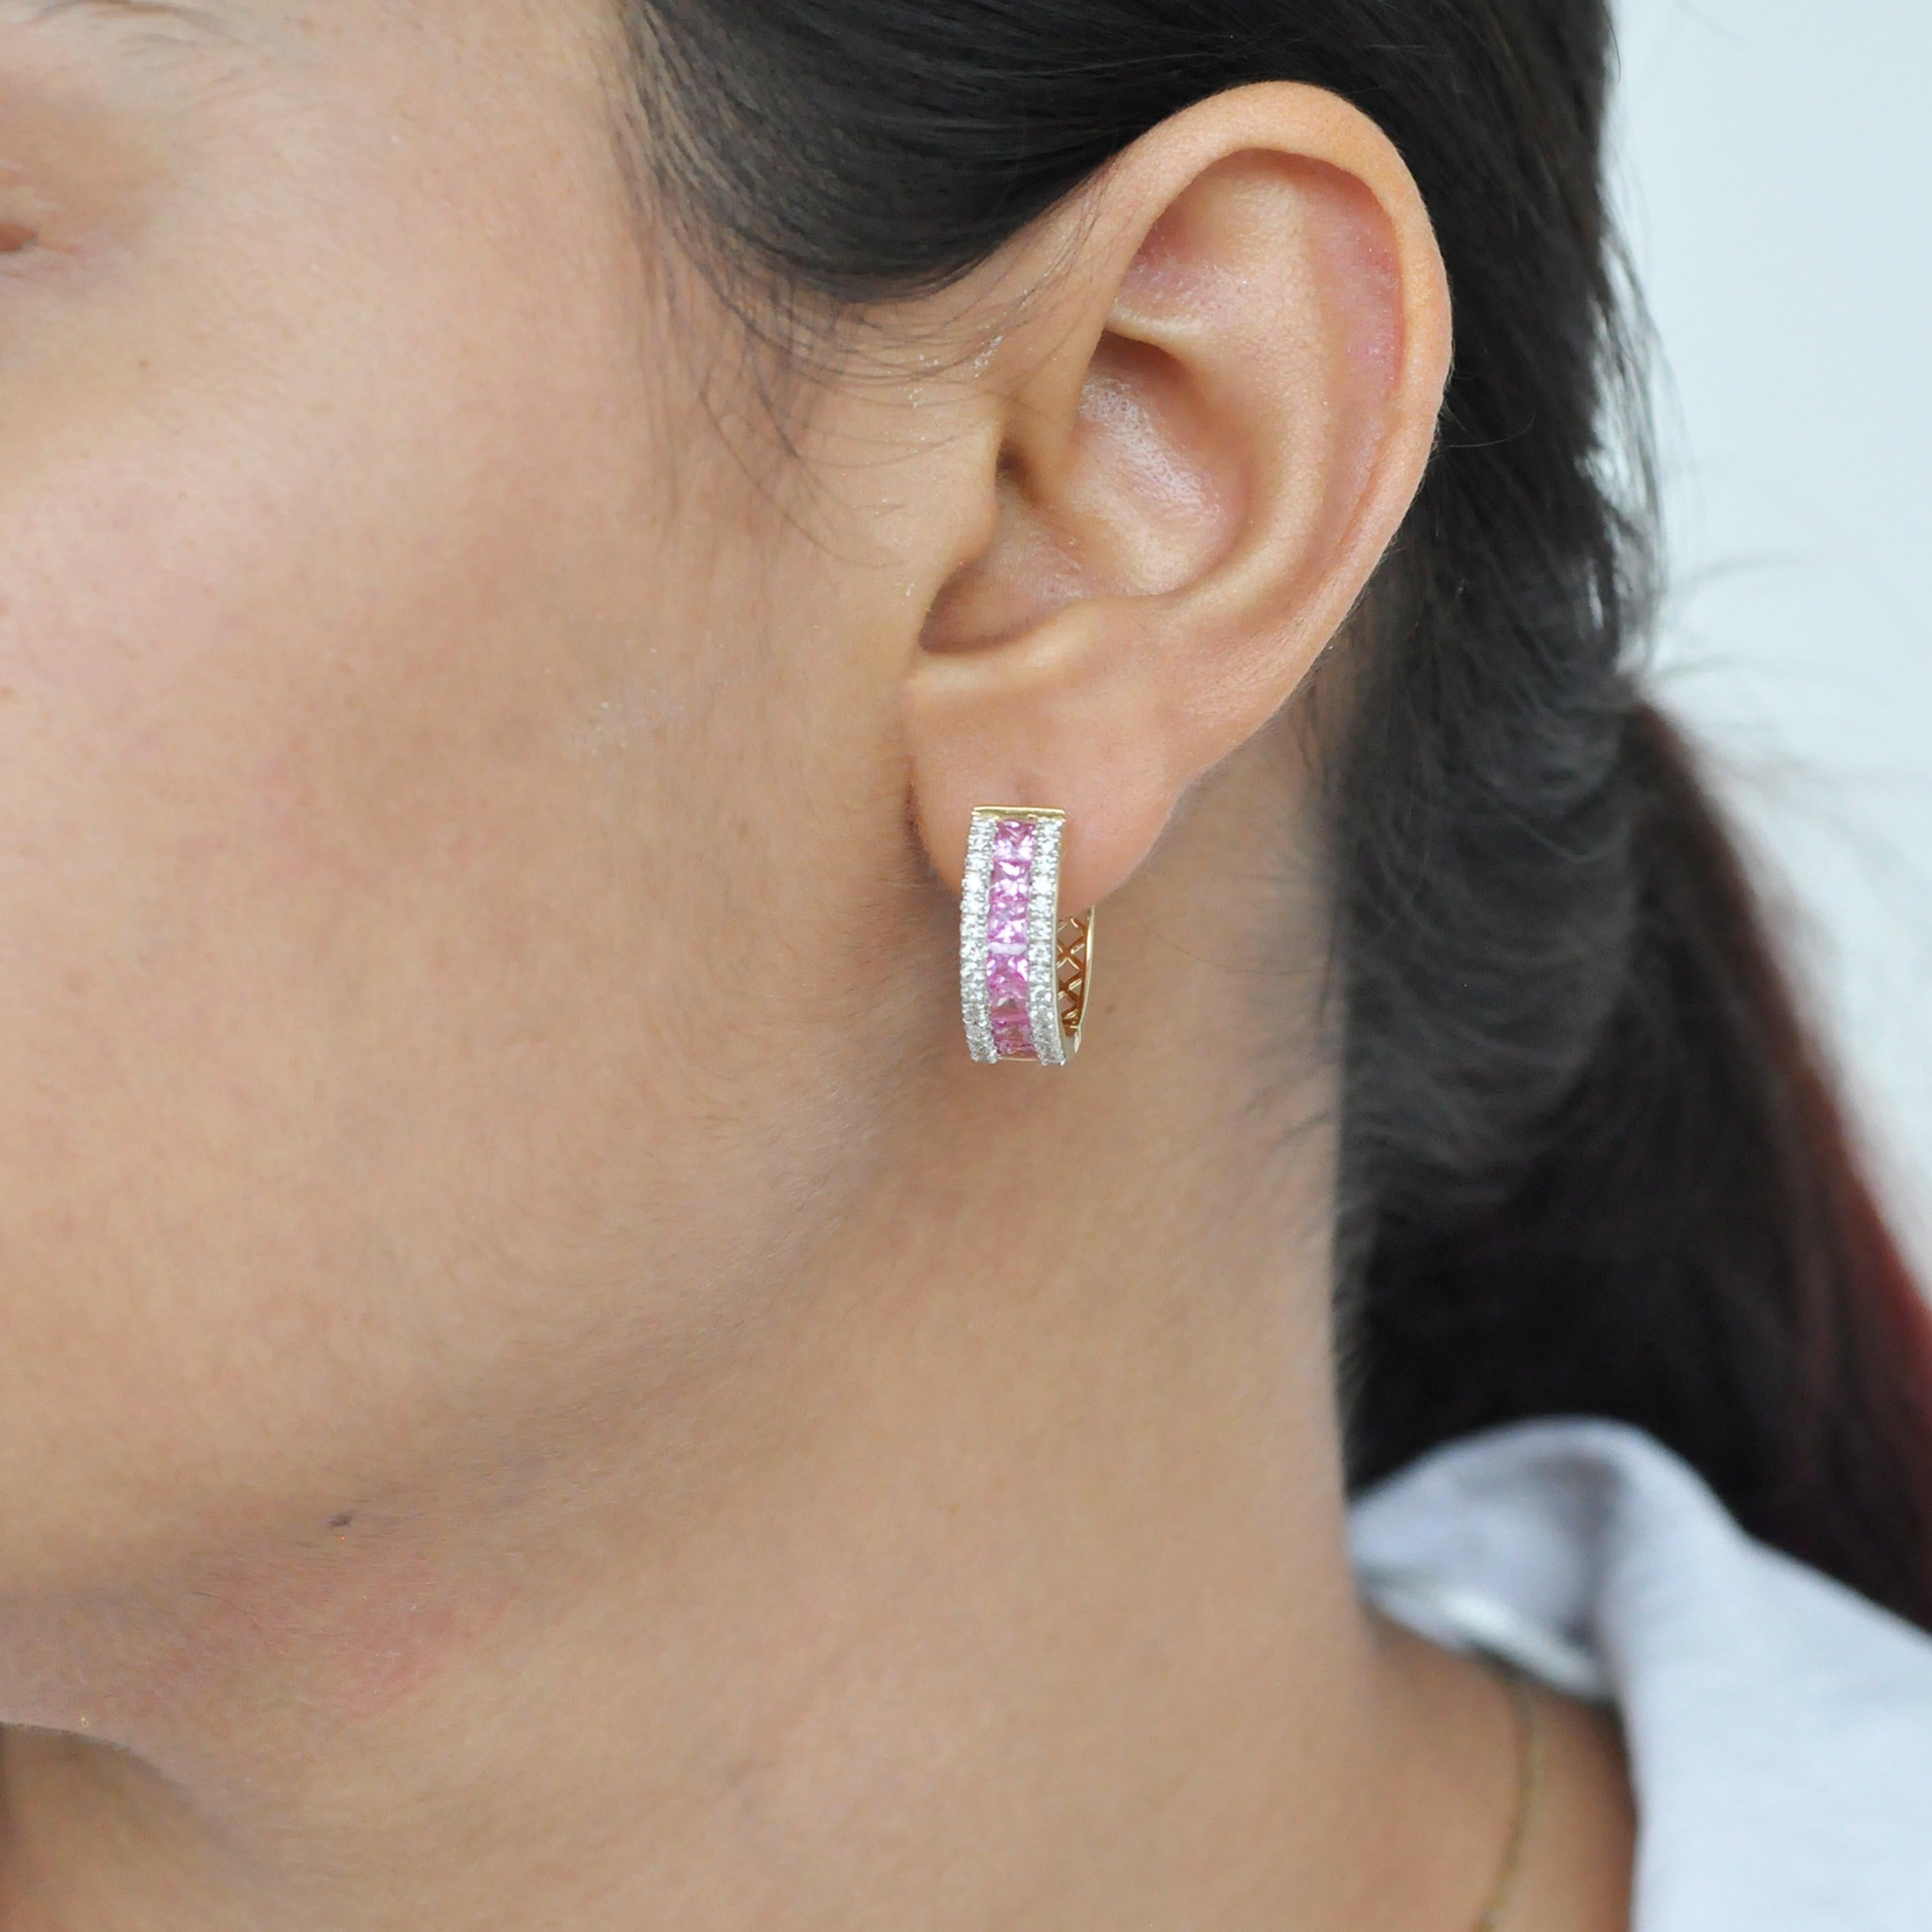 18 karat gold channel set princess cut pink sapphire diamond huggie hoop earrings.

The enchanting mini-hoop earrings with the vibrant pink sapphires incorporated within an equivalent layer of micro pave set diamonds on either side is distinctive in